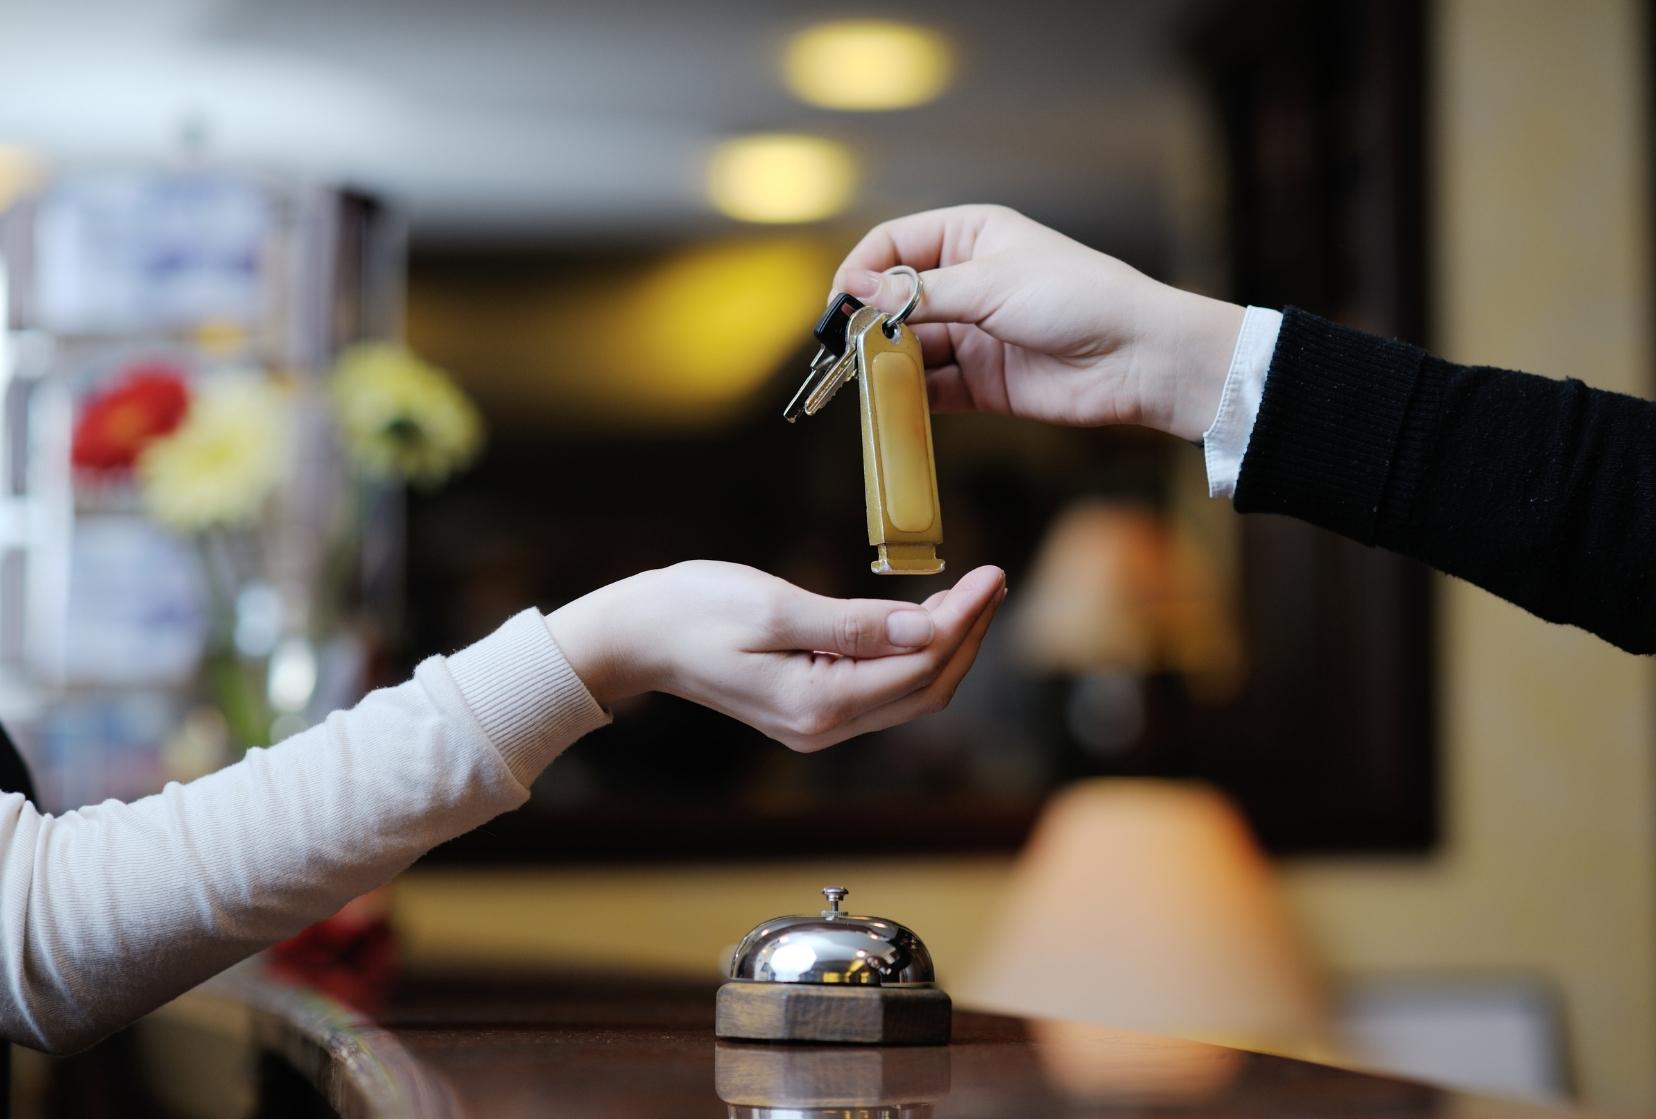 IoT automation trends in the hospitality industry